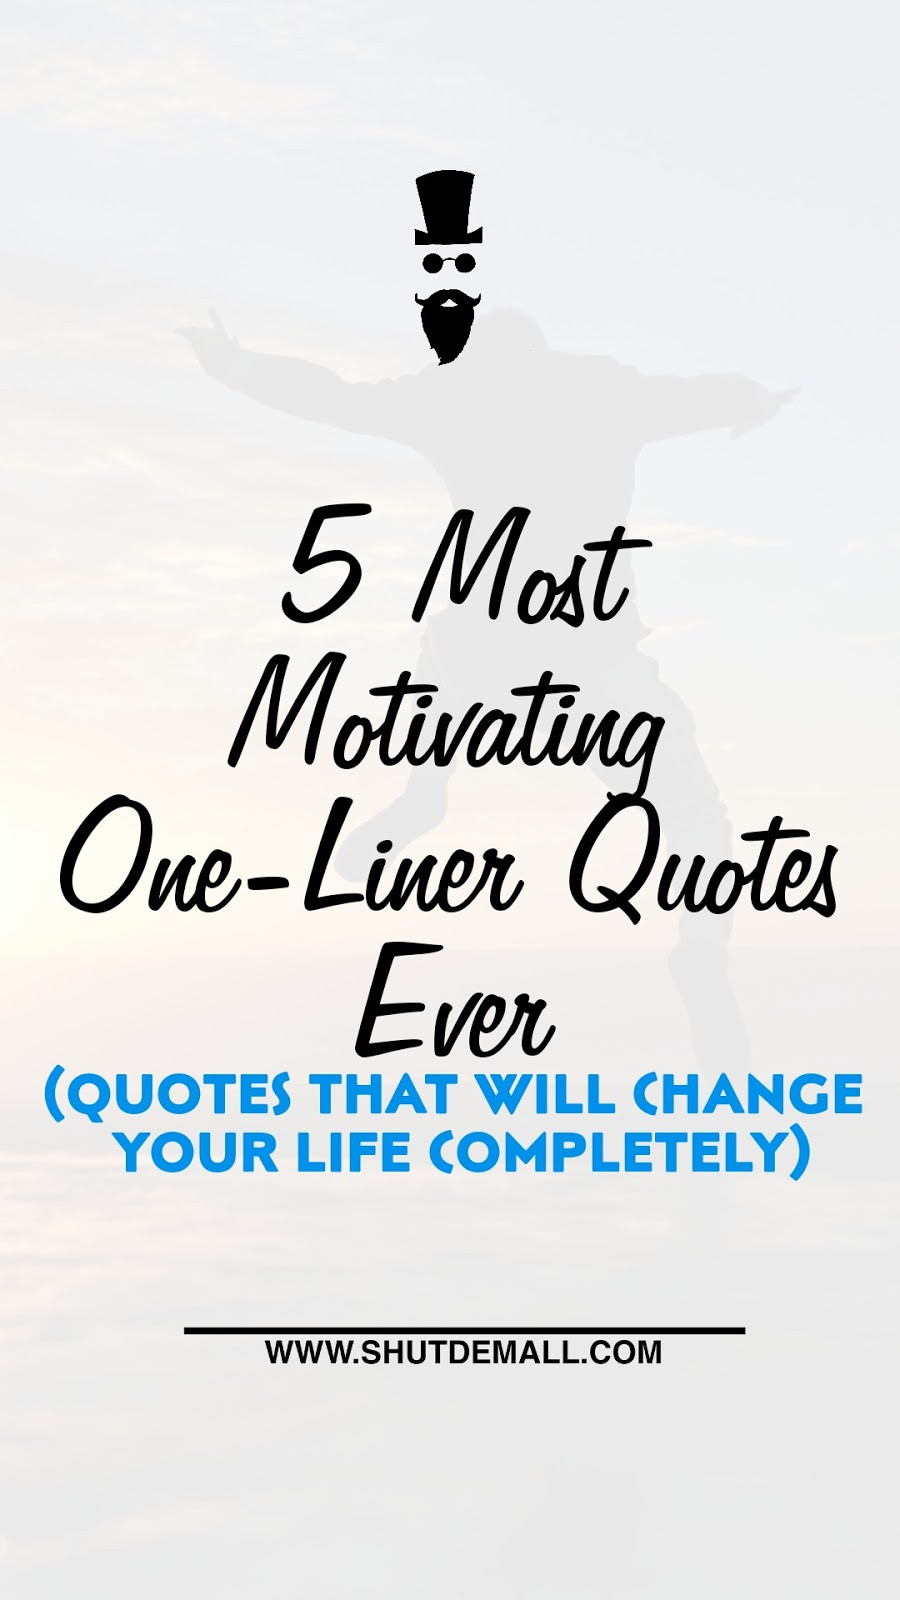 One Life Quotes
 Most Motivating e Liner Quotes Ever